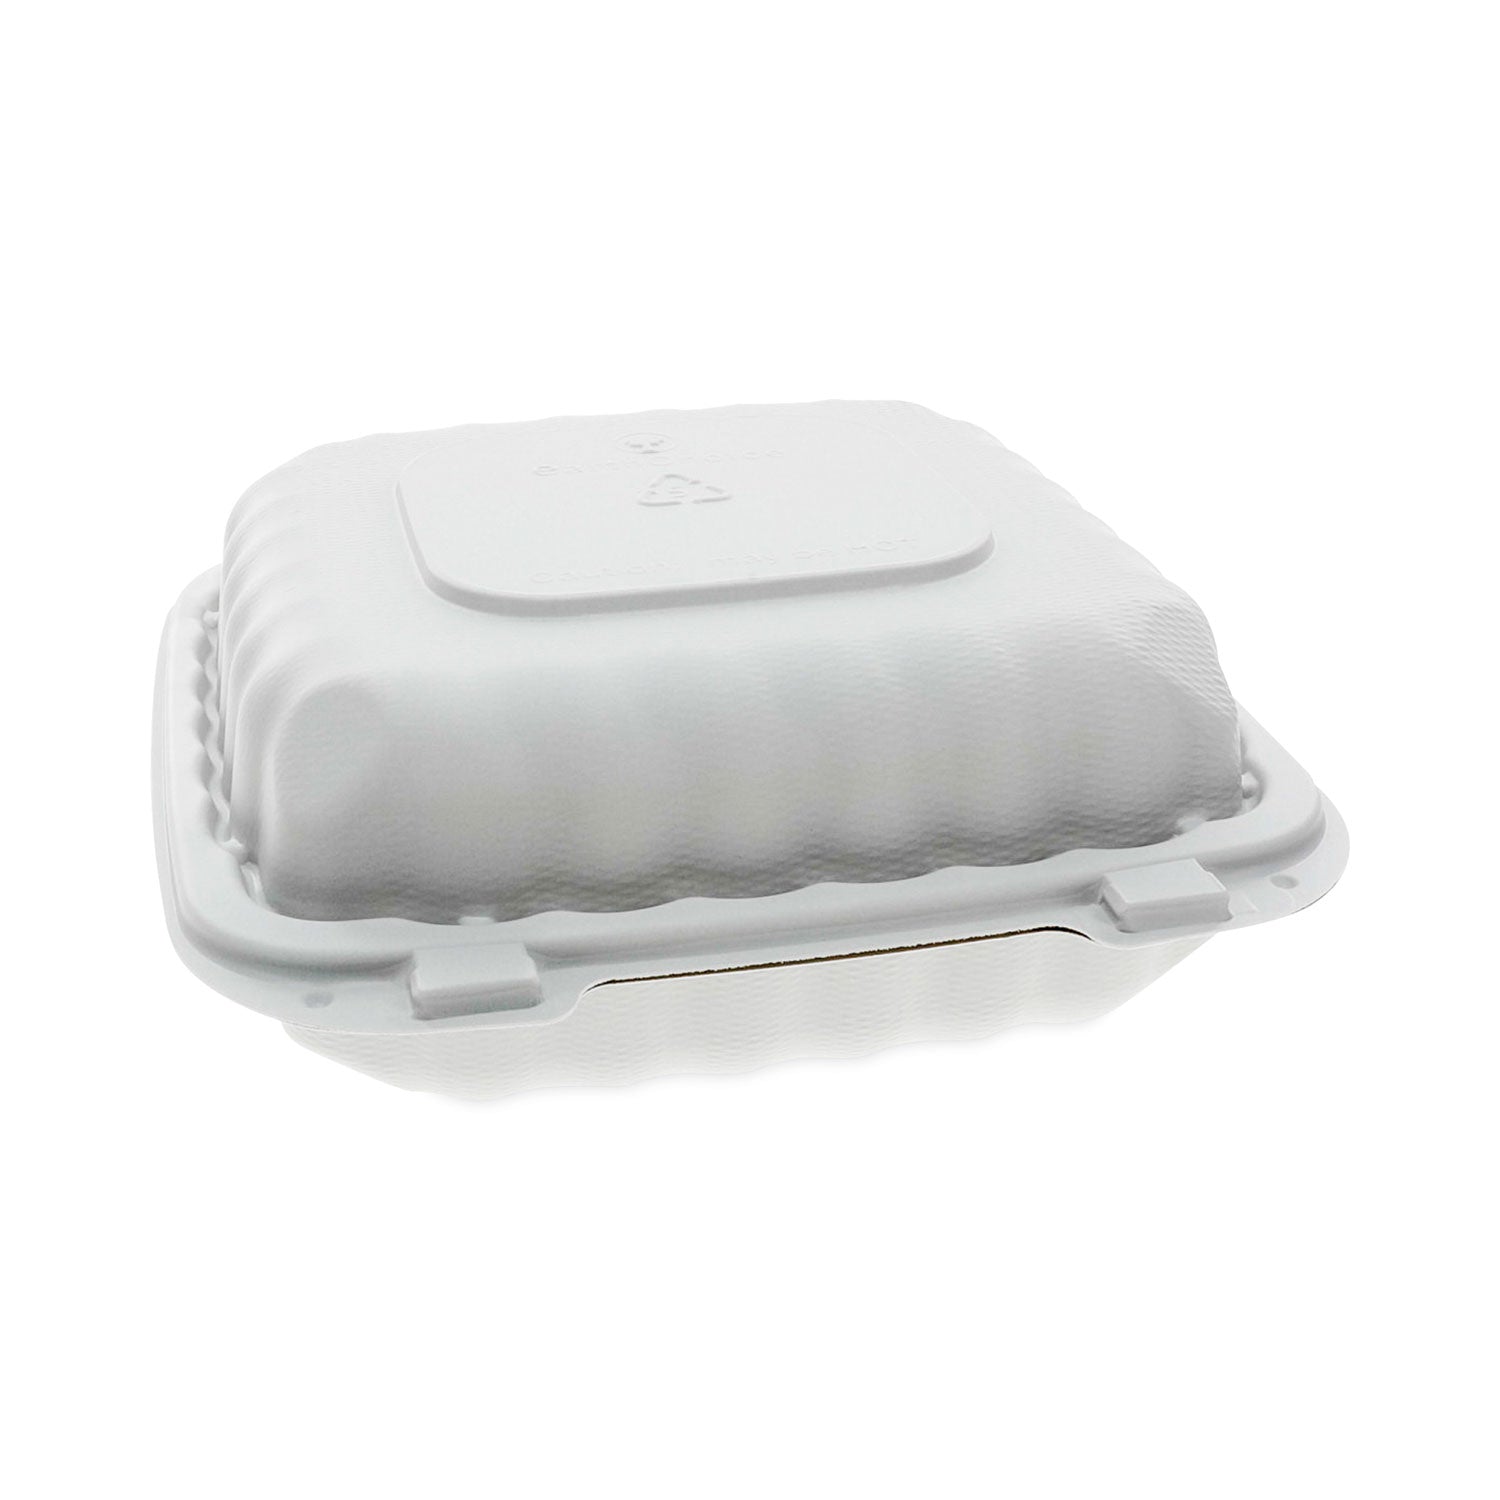 earthchoice-smartlock-microwavable-mfpp-hinged-lid-container-831-x-835-x-31-white-plastic-200-carton_pctycn808010000 - 2